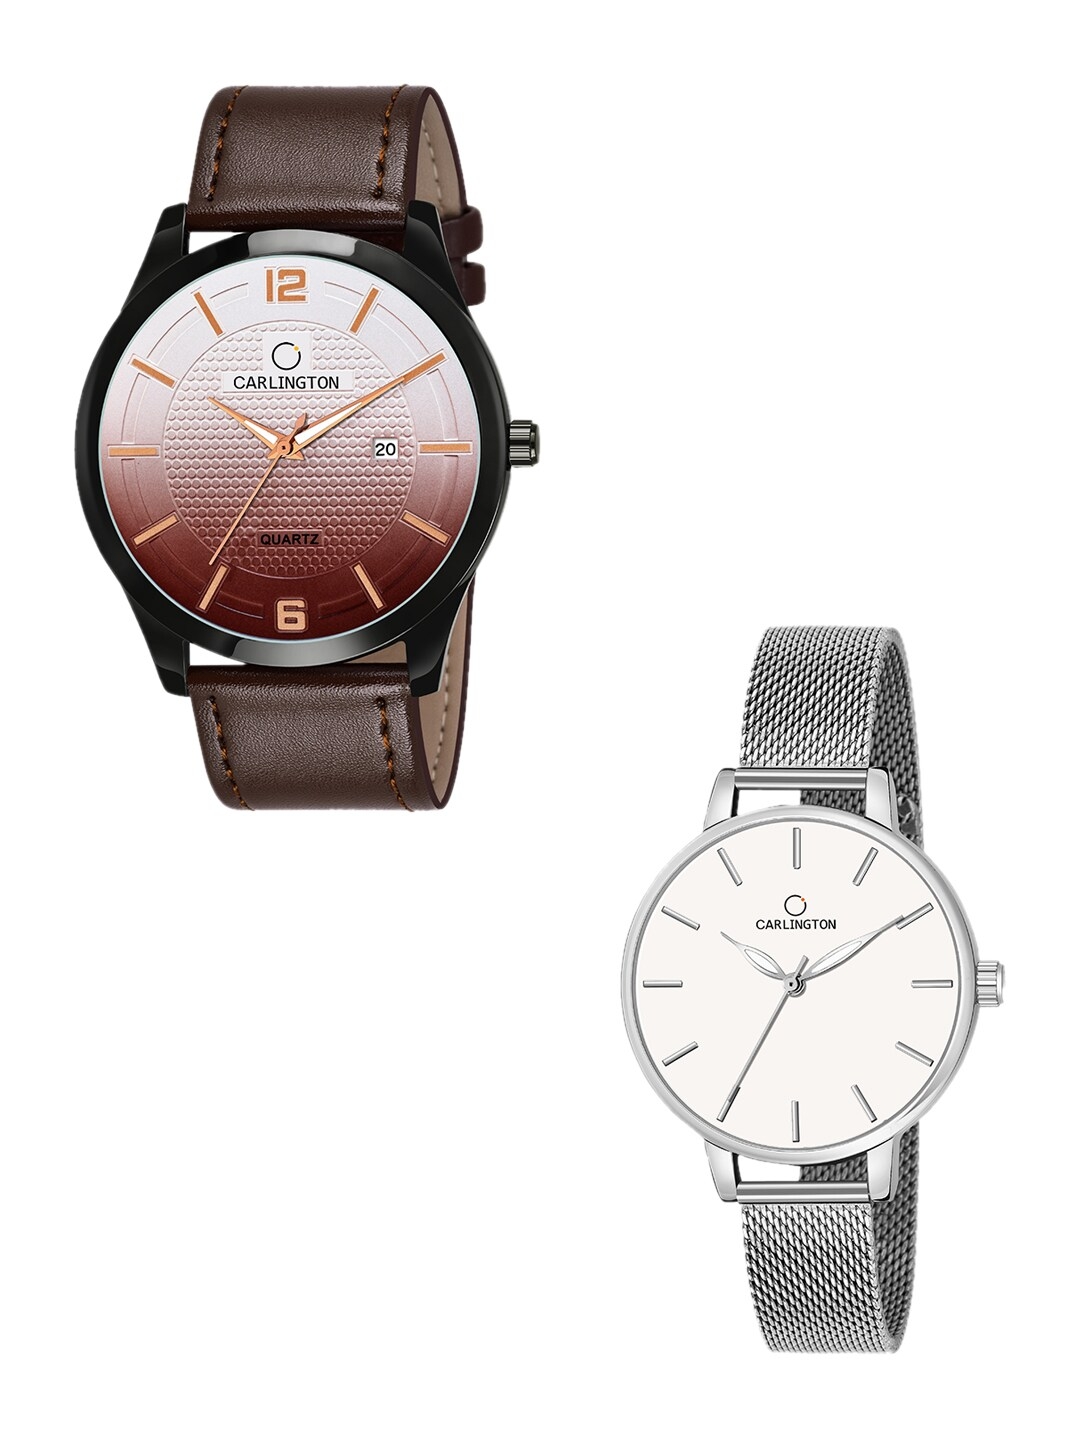 CARLINGTON Unisex Pack Of 2 Analog Watches   Combo CT1010 Brown   CT2014 Silver